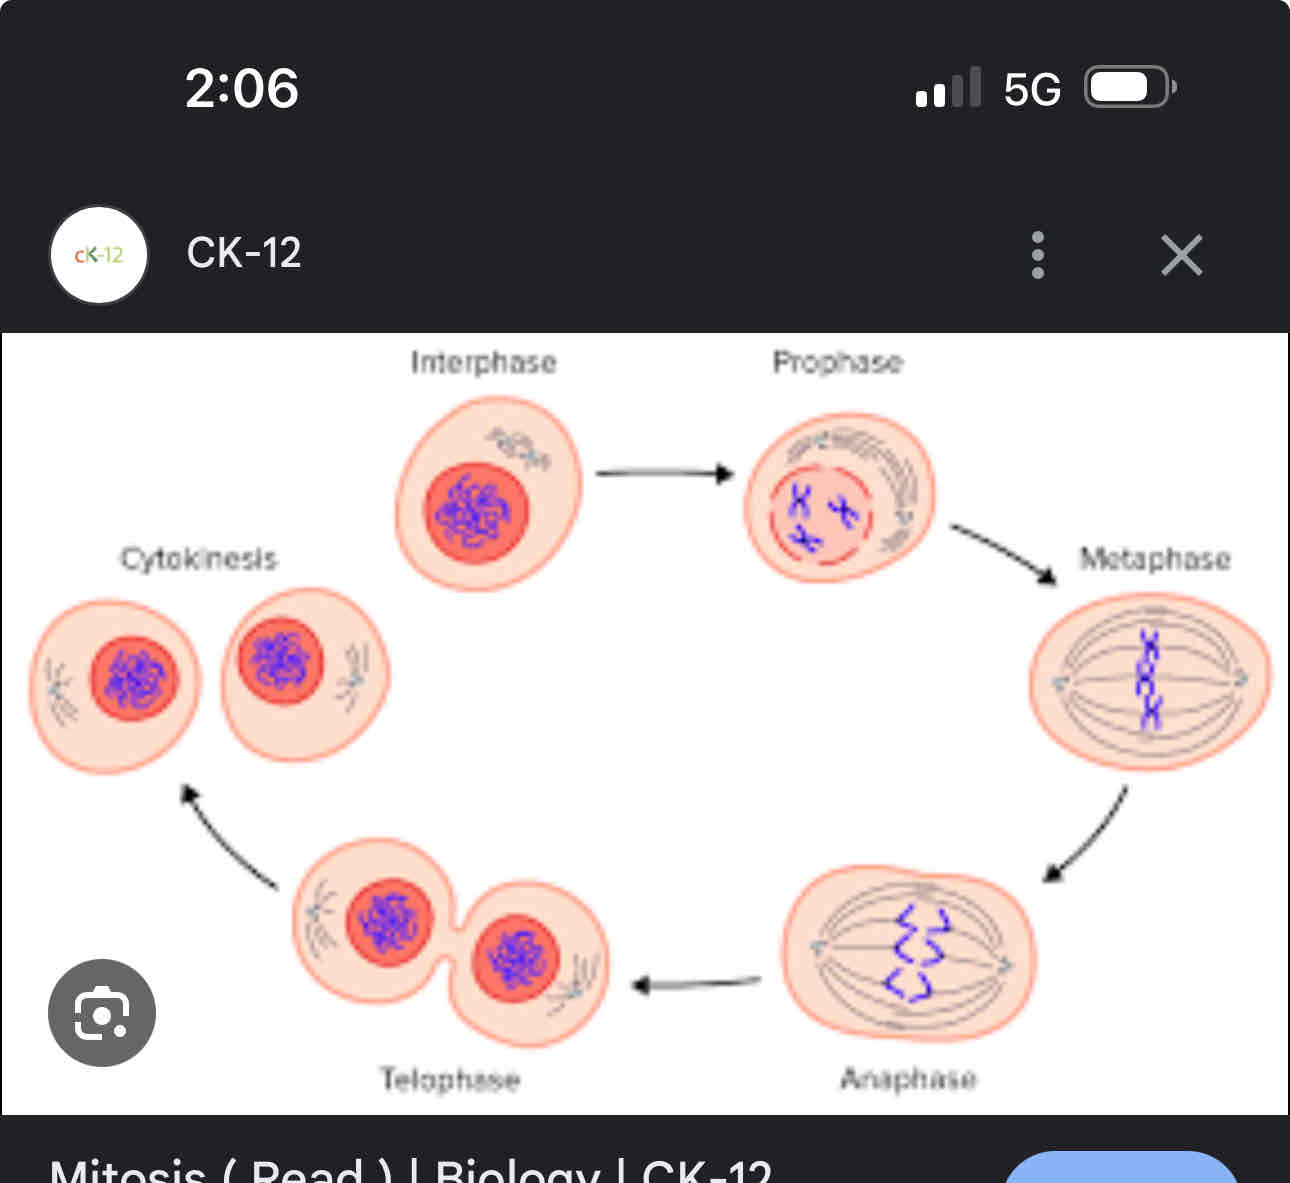 <p>Interphase G1- growth</p><p>Interphase G2- Reputation of DNA and growth</p><p>Prophase- Nuclear membrane dissolves nucleus dessolves, sister chromtids coil up and condense, spinal fibres form</p><p>Metaphase- sister chrometids lineup in the middle</p><p>Anaphase- sister chromotids pulled apart</p><p>Telophase- nucleuar membrane appear, cell divides into 2 new cells</p>